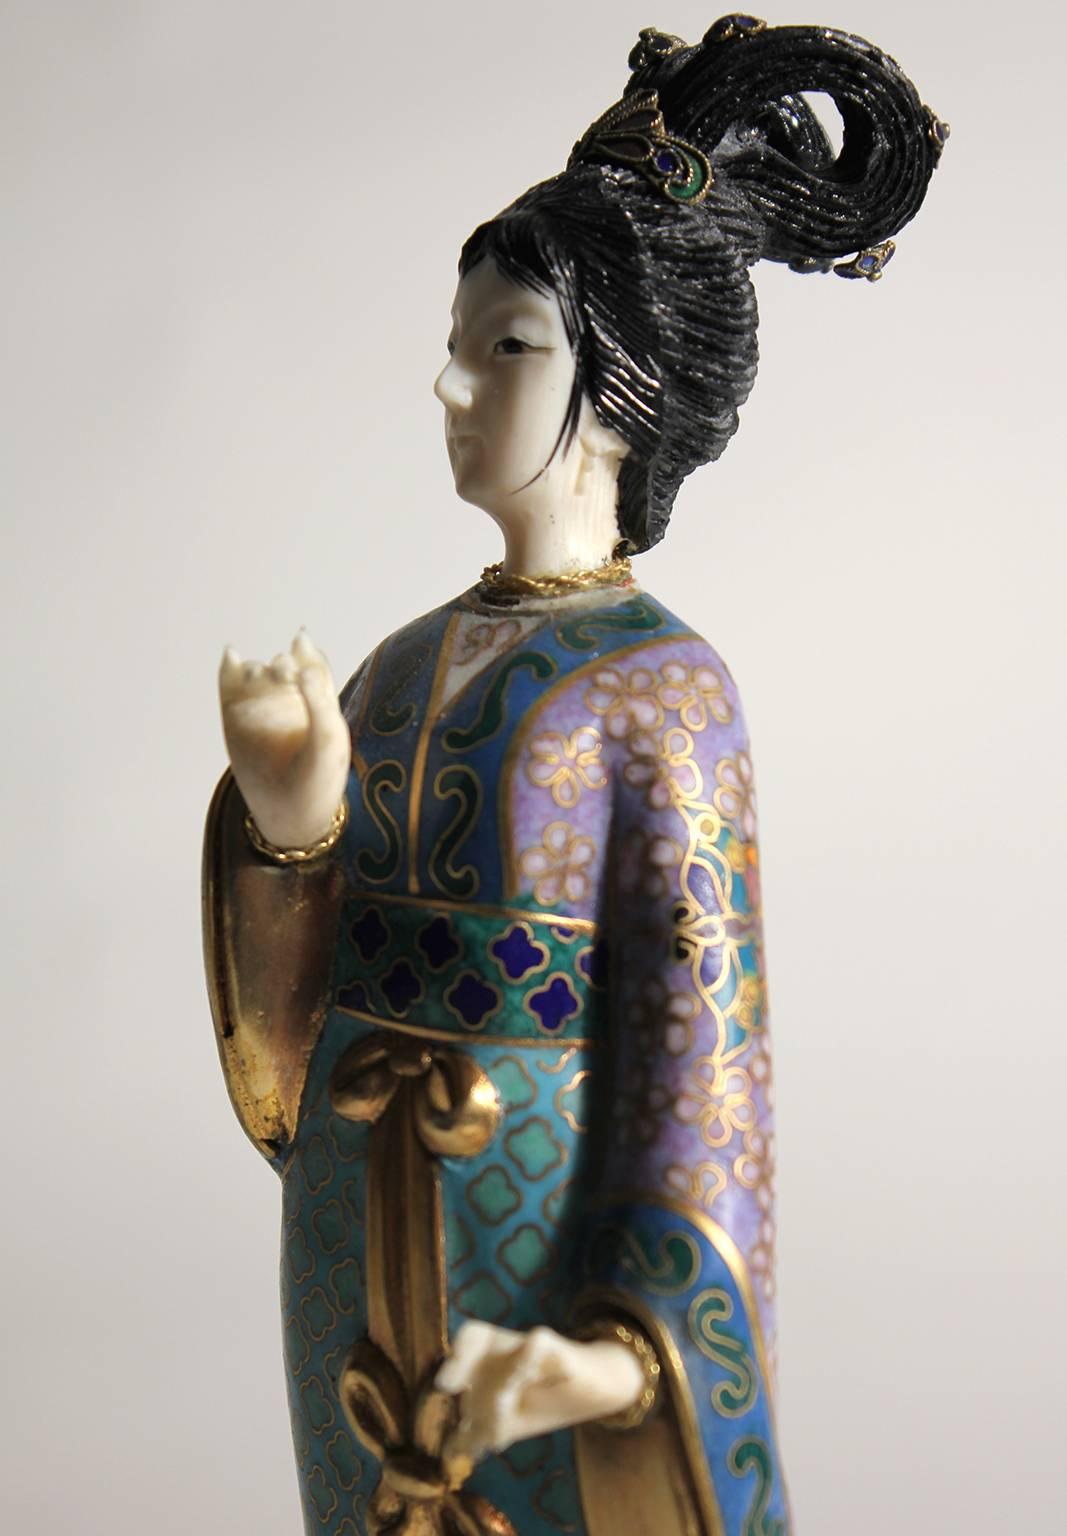 Early 20th Century Antique Chinese Cloisonne Enameled Carved Guanyin Quan Yin Sculpture Figurine For Sale